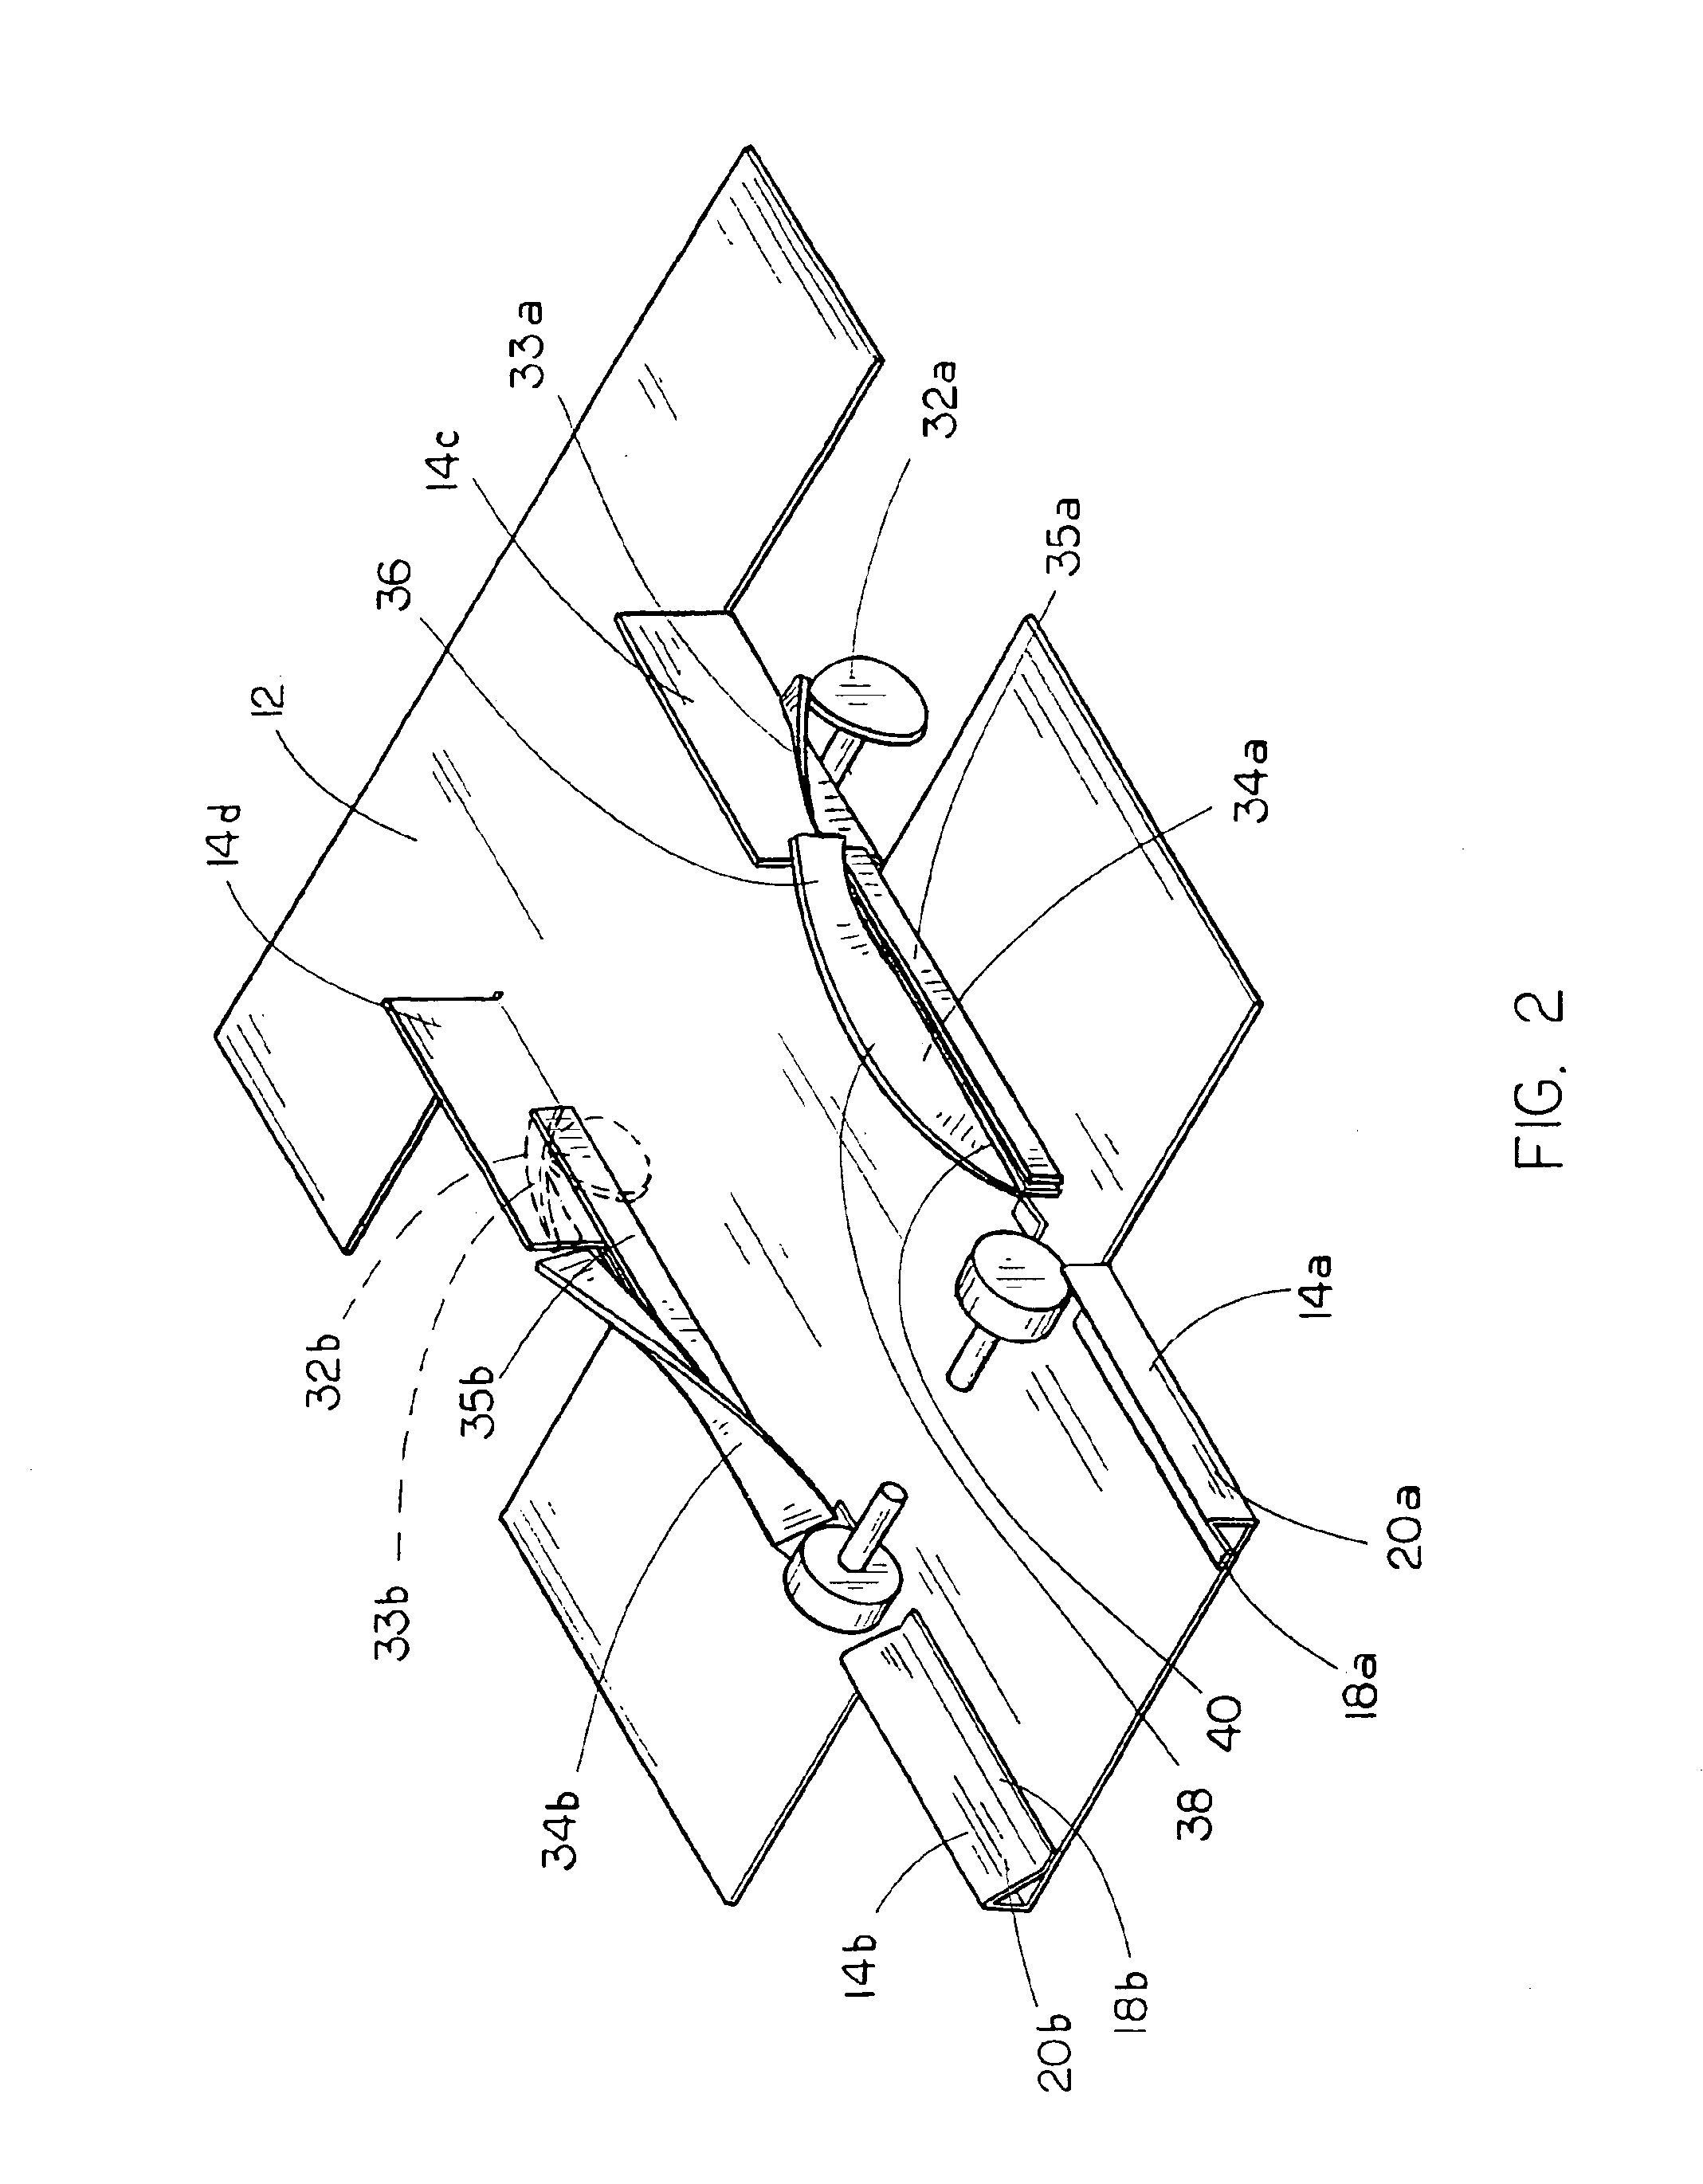 Method of forming box with gusseted corner